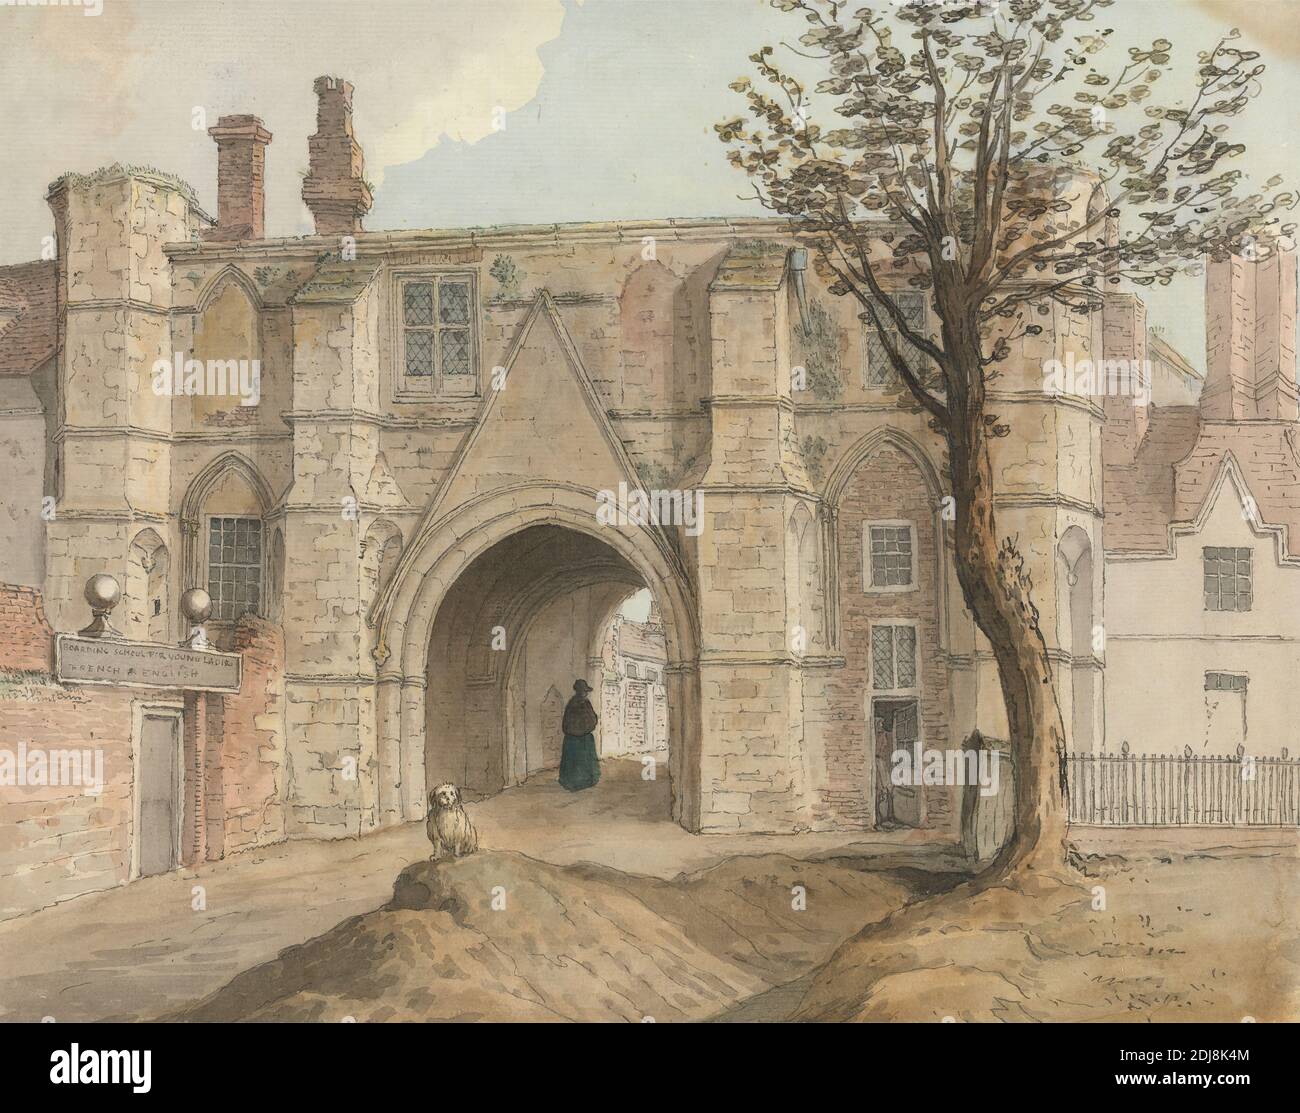 The Gatehouse, Reading Abbey, Samuel Hieronymus Grimm, 1733–1794, Swiss, undated, Watercolor with brown ink over graphite on medium, slightly textured, cream laid paper, Sheet: 9 3/8 x 12 inches (23.8 x 30.5 cm), chimneys (architectural elements), dog (animal), fence, gatehouses, landscape, school, trees, women, Berkshire, England, Reading, Reading abbey, United Kingdom Stock Photo